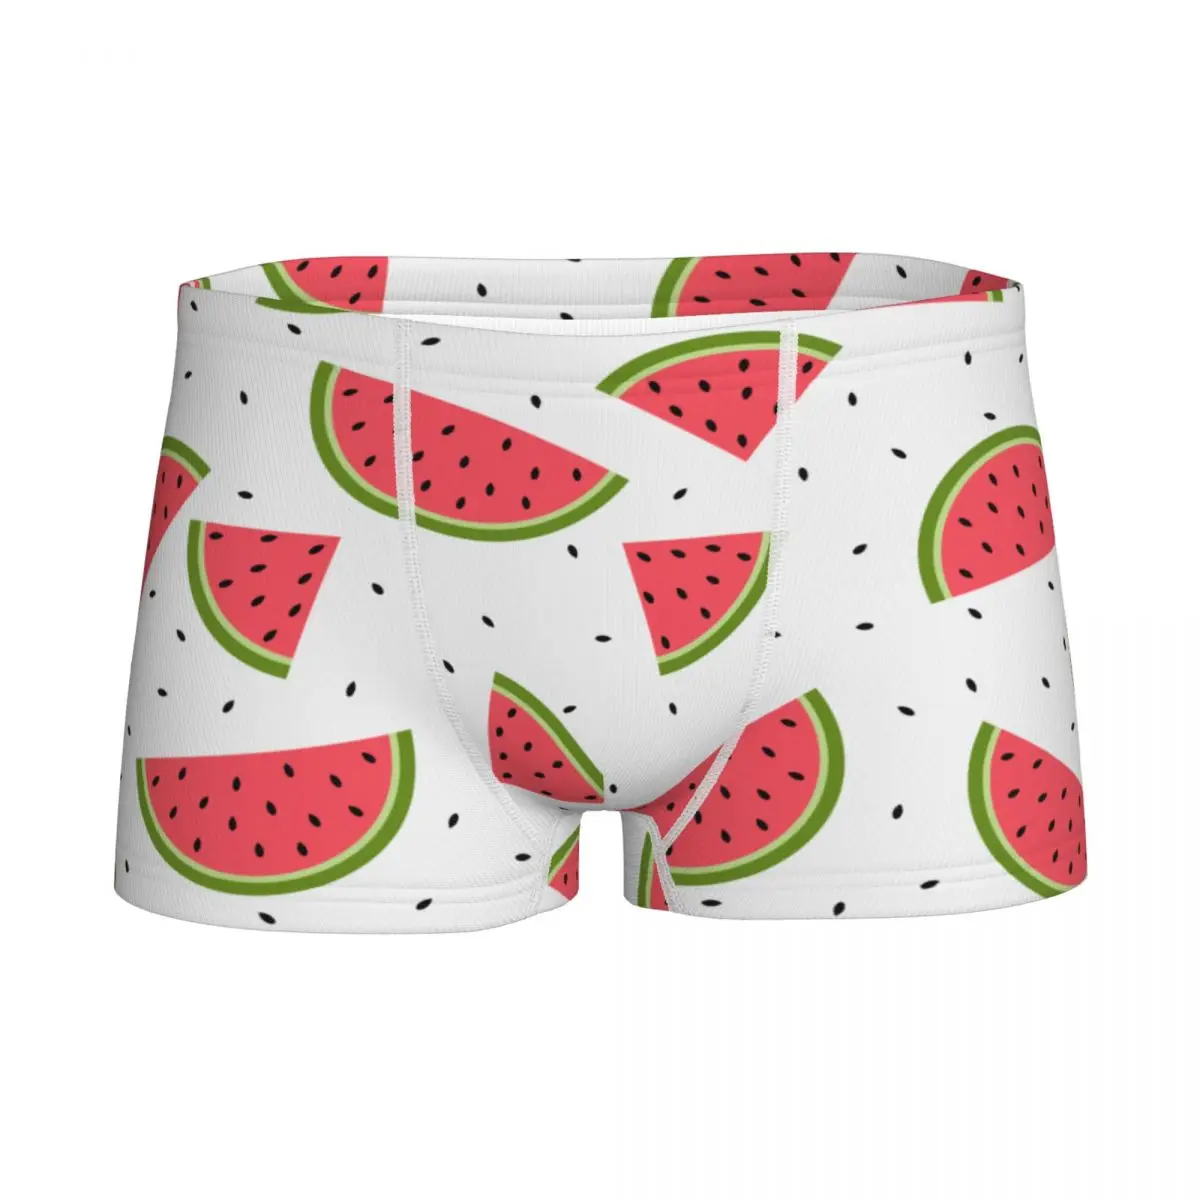 

Boys Cute Summer Fruits Watermelon Boxers Cotton Youth Comfortable Underwear Children's Shorts Panties Teenagers Underpants